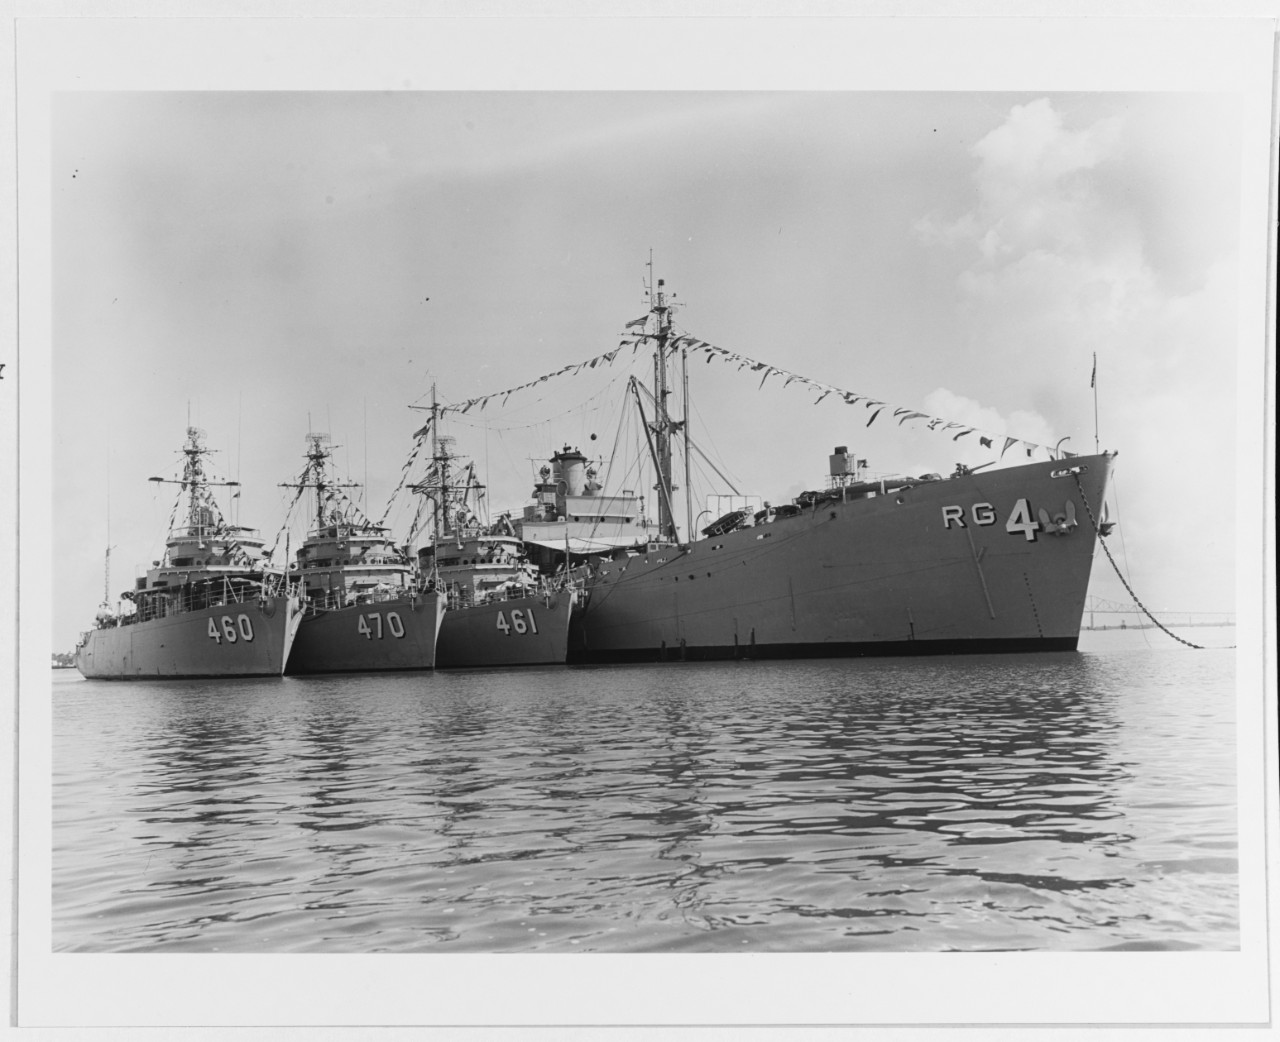 USS NOTABLE (MSO-460)